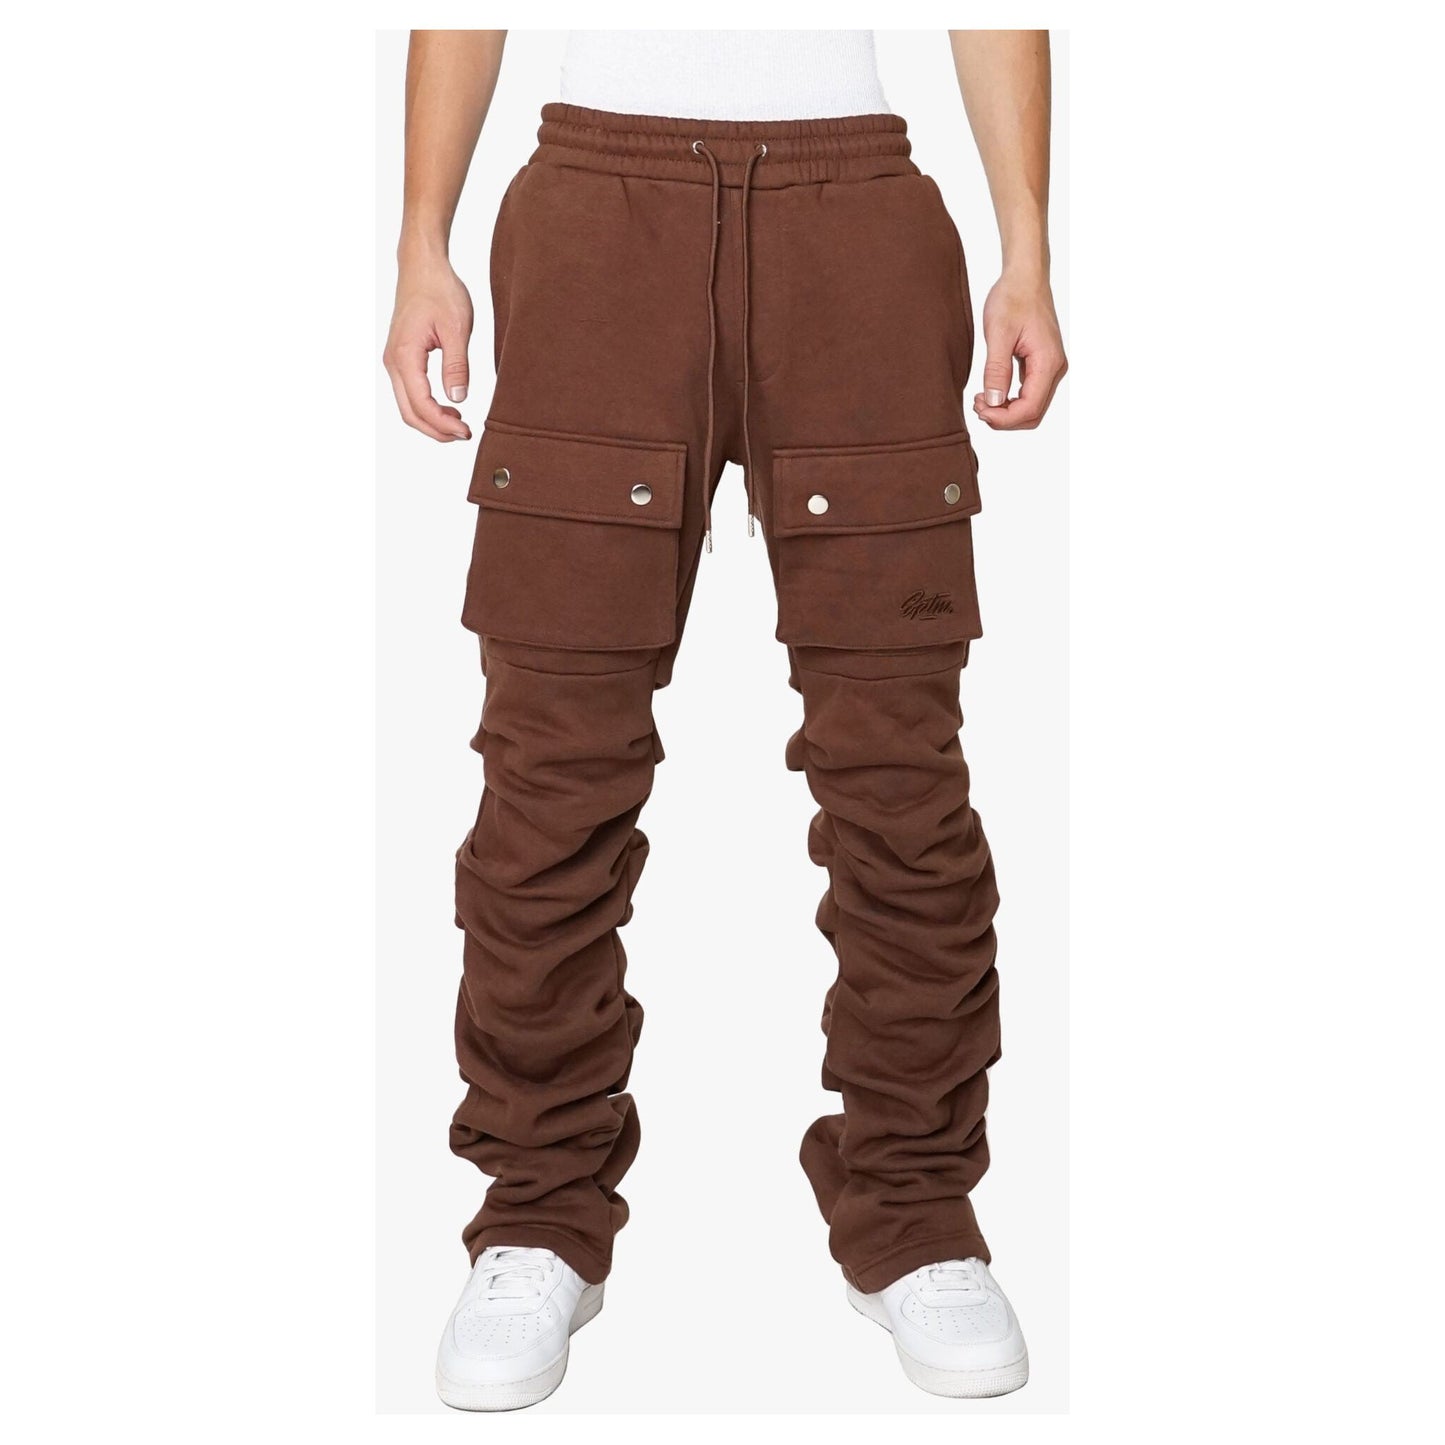 EPTM Stacked Cargo Sweatpants - Brown